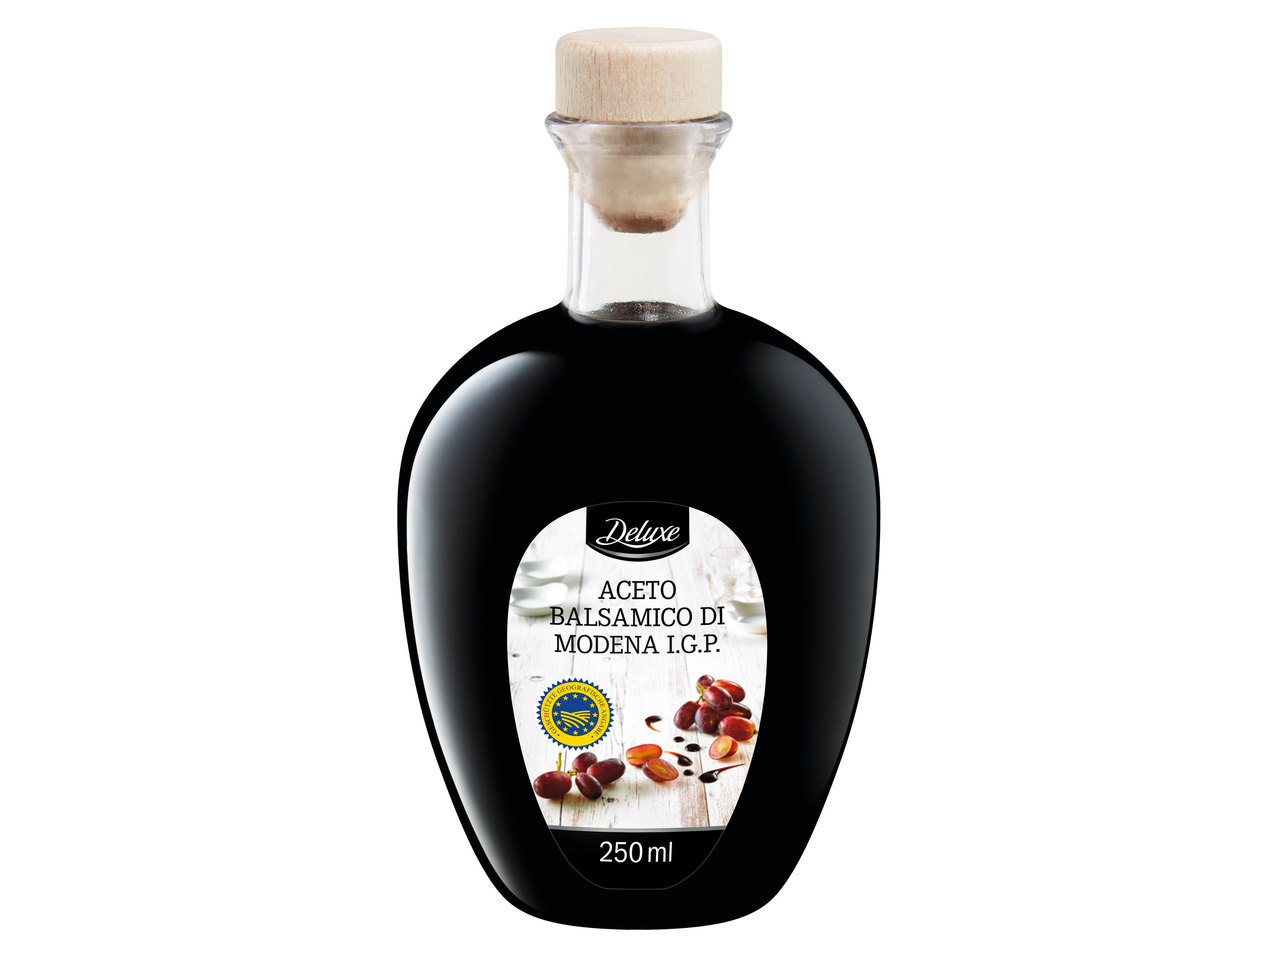 DELUXE Aceto Balsamico di Modena I.G.P. oder Fruchtessig